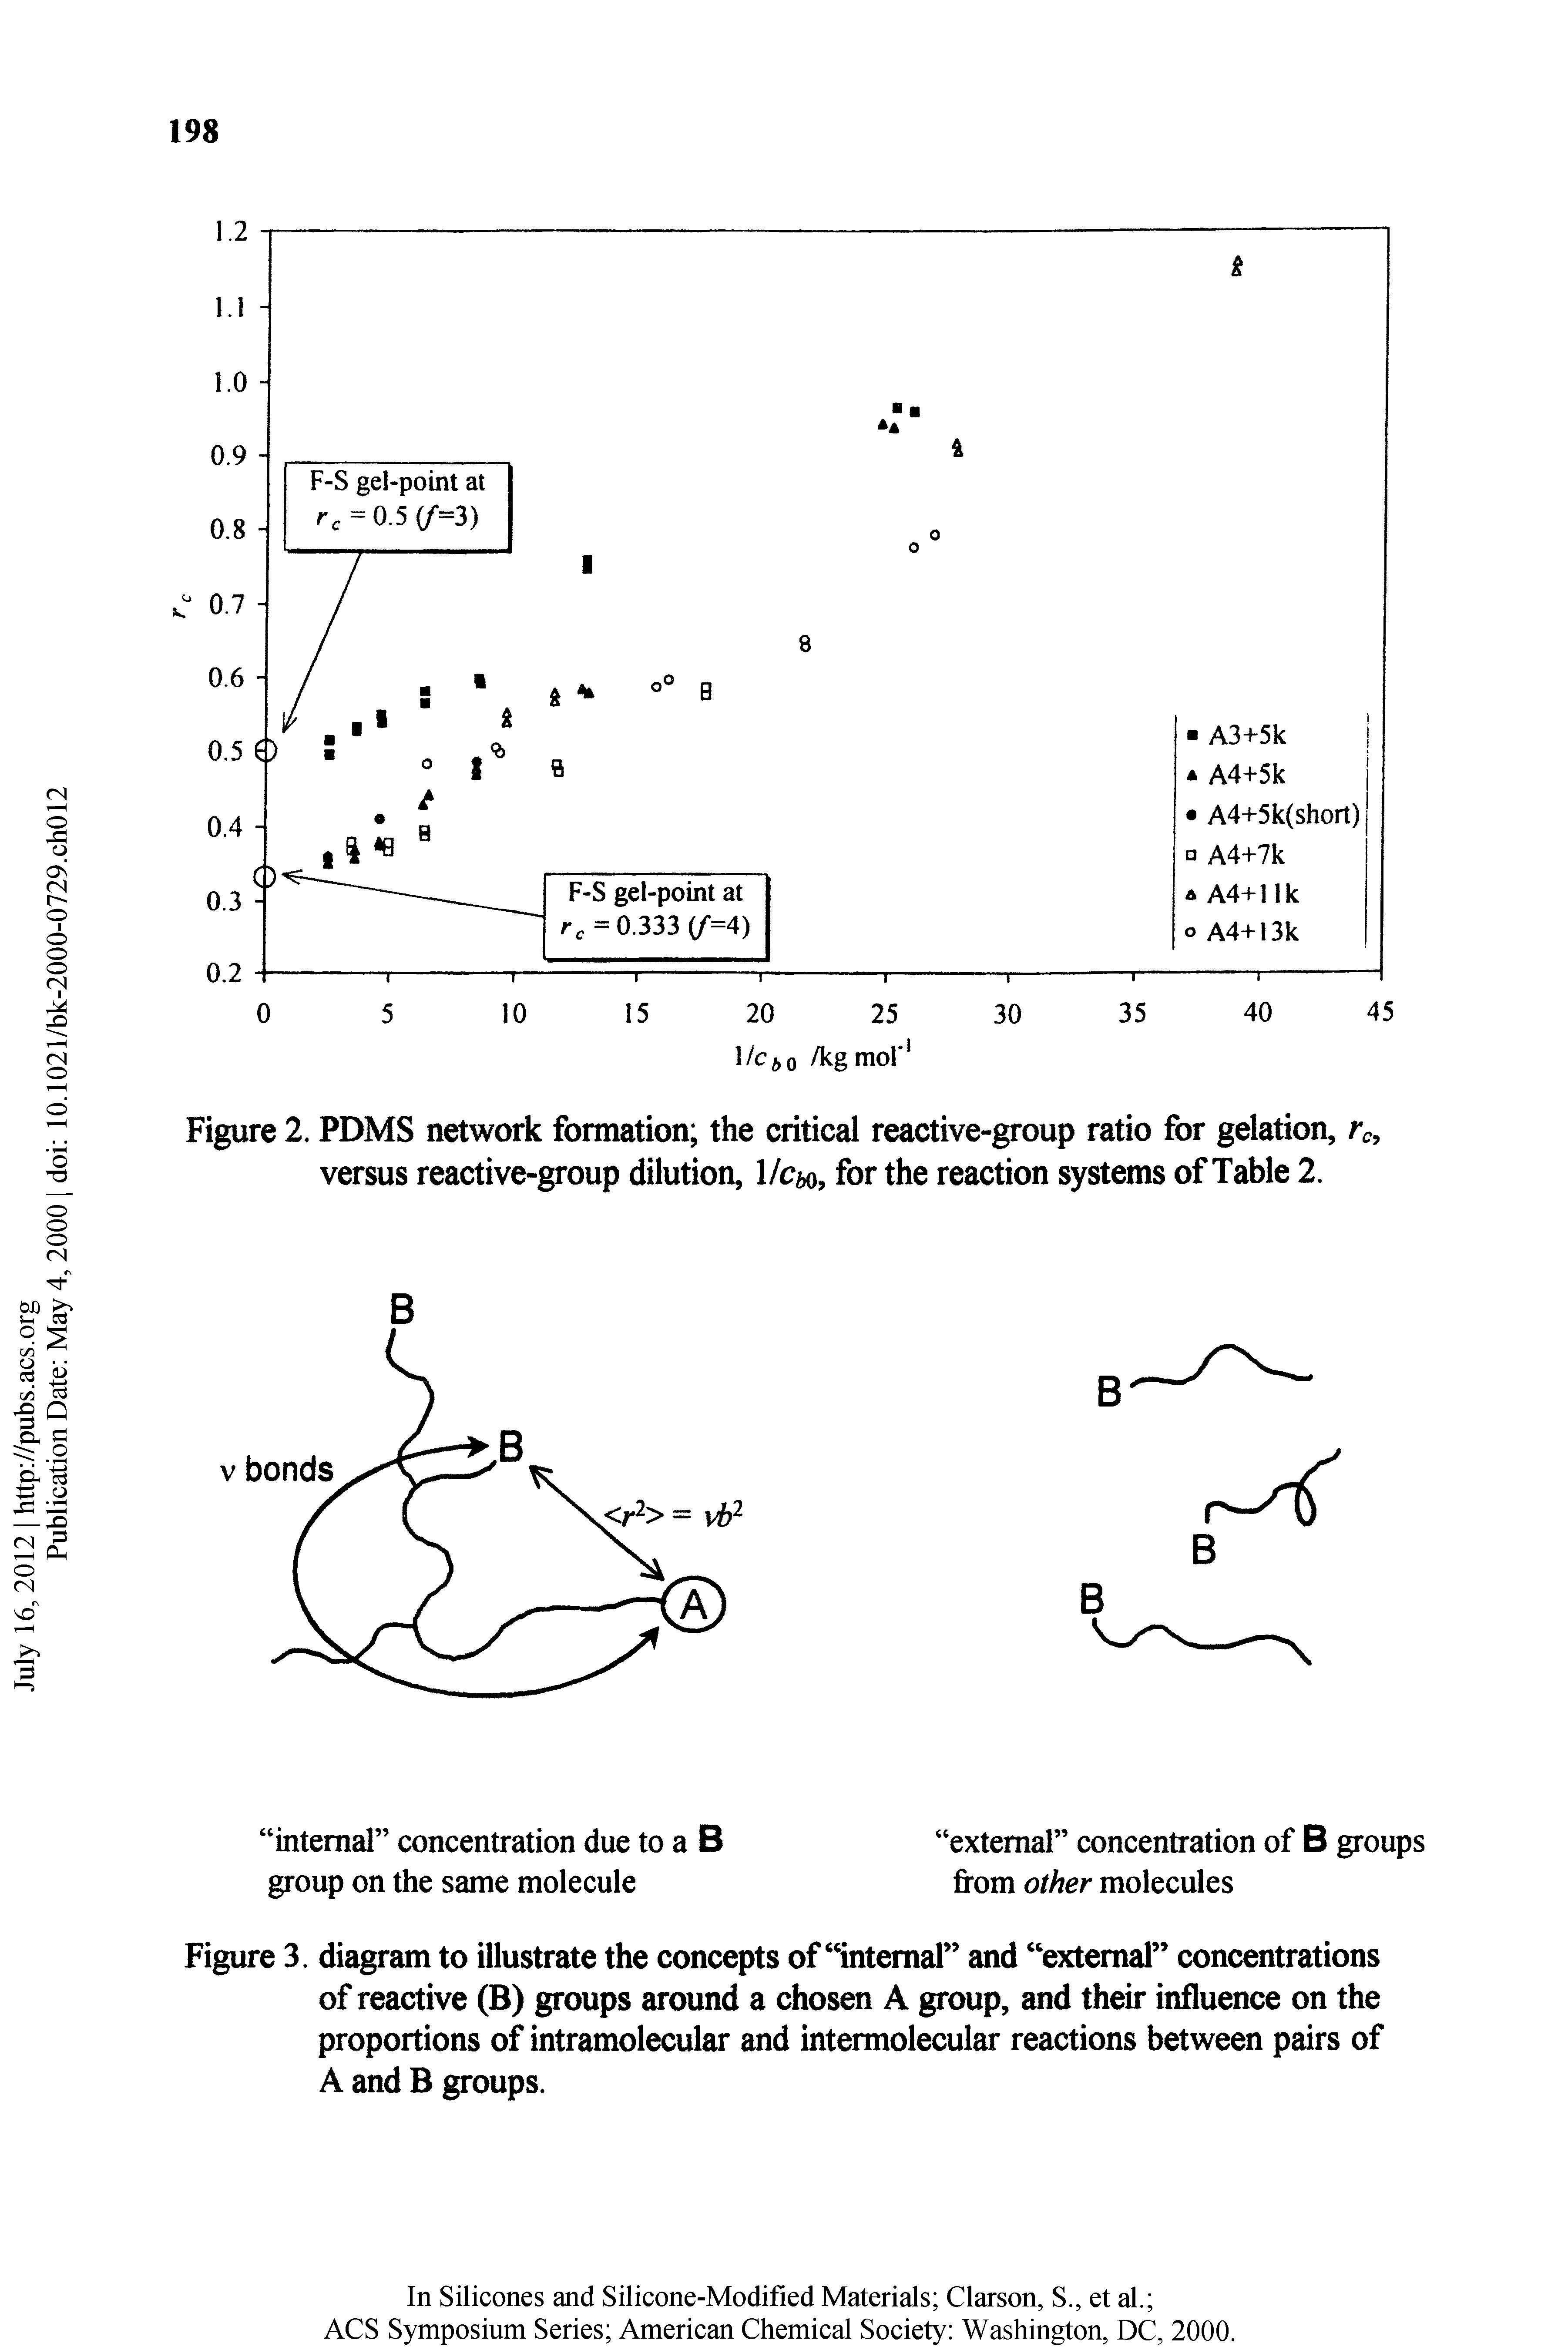 Figure 2. PDMS network formation the critical reactive-group ratio for gelation, n, versus reactive-group dilution, 1/cm, for the reaction systems of Table 2.